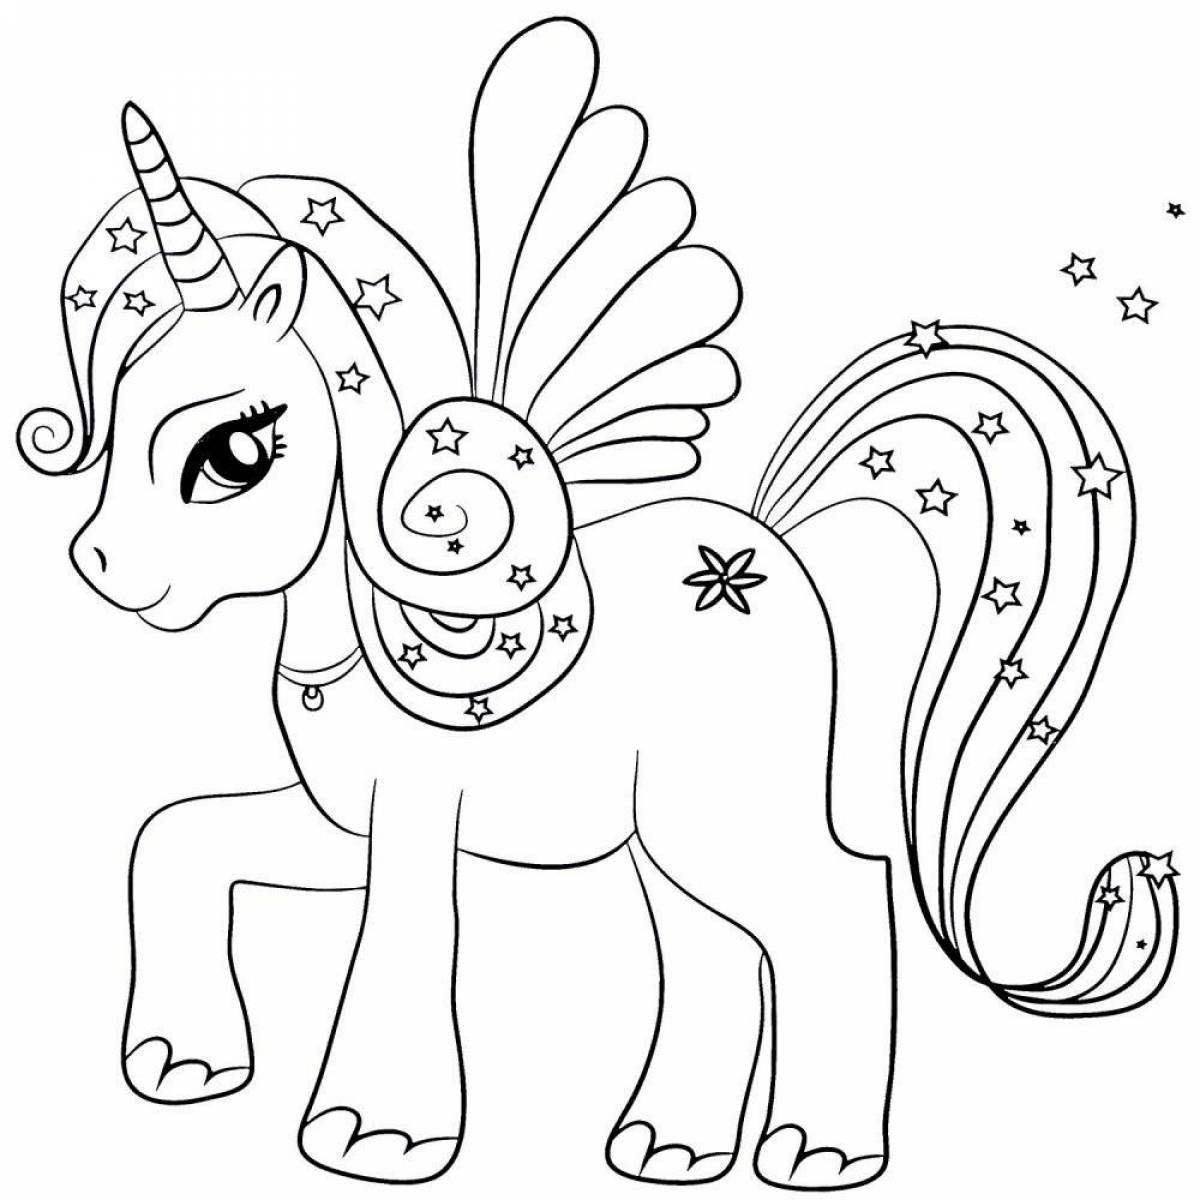 Exotic coloring book for girls unicorns